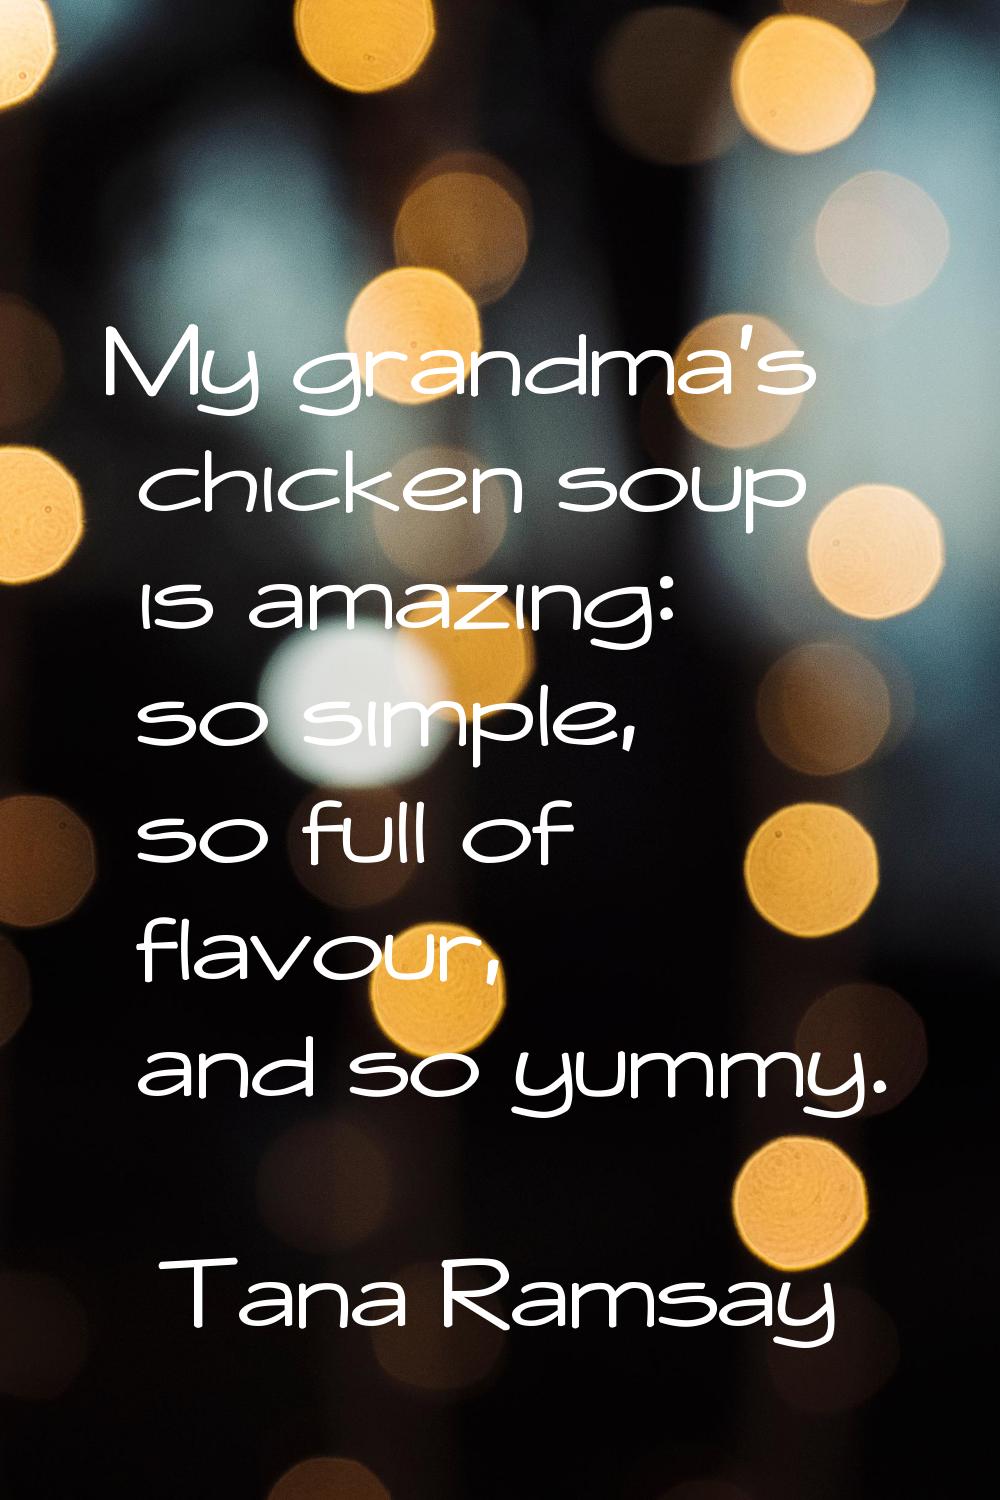 My grandma's chicken soup is amazing: so simple, so full of flavour, and so yummy.